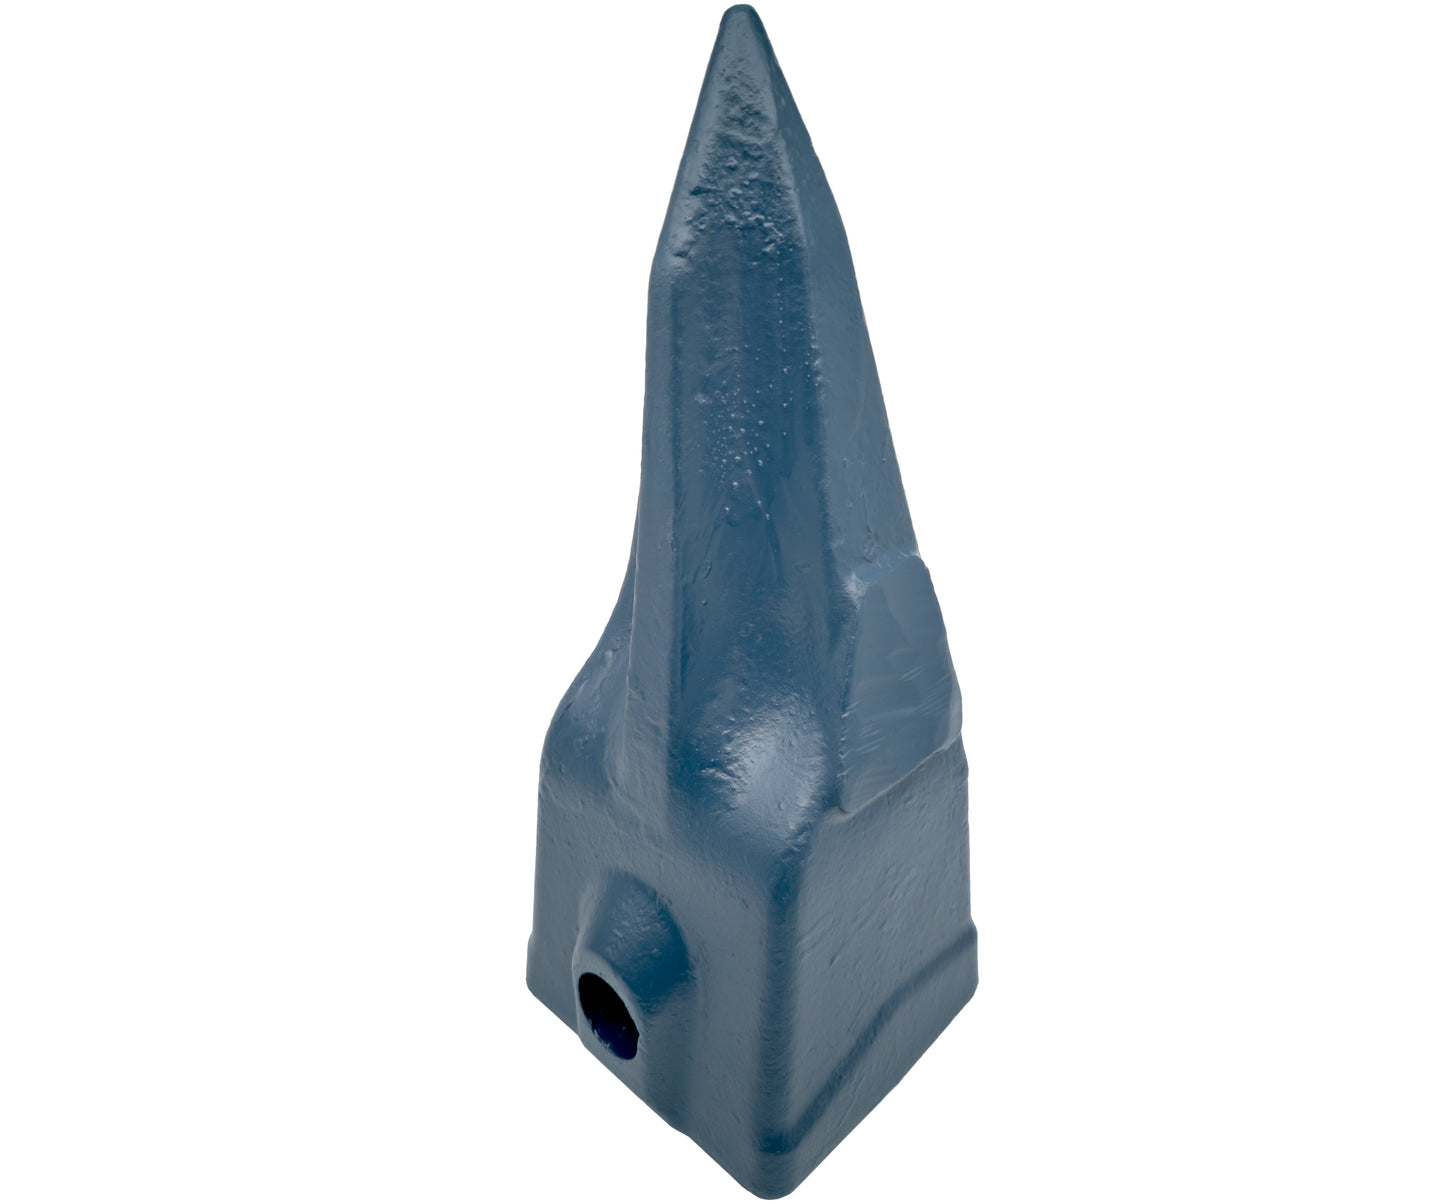 X385T Single Tiger Rock Tooth - 'Hensley X385 Style' for Excavator Buckets